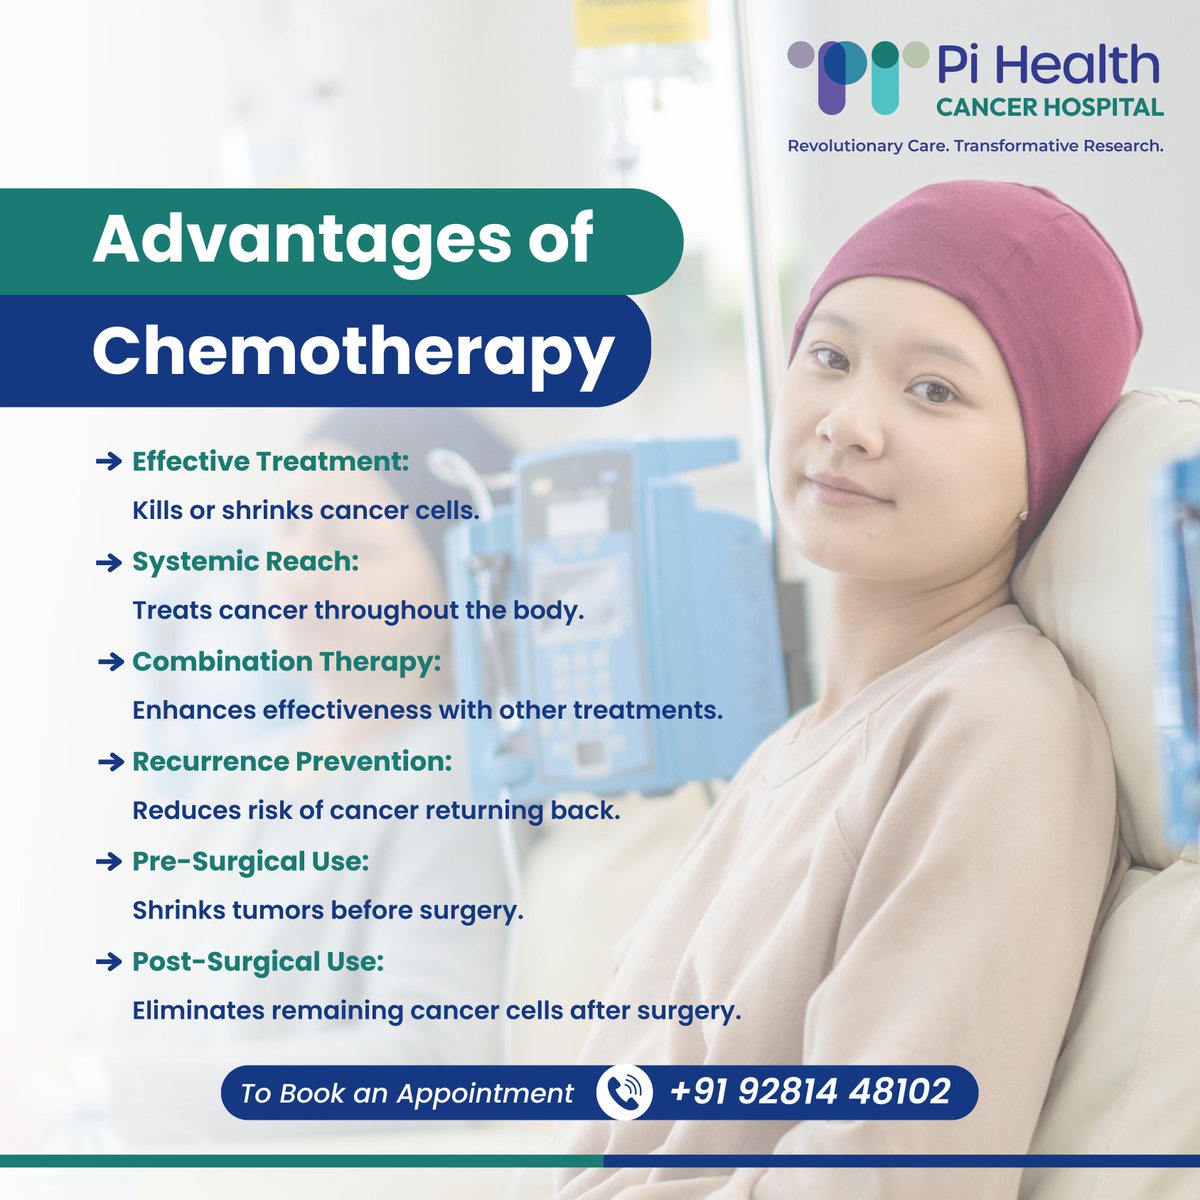 #Chemotherapy is a type of cancer treatment that uses powerful drugs to destroy cancer cells. It works by targeting cells that grow and divide rapidly, which is a characteristic of cancer cells..
To learn more visit #PiHealthCancerHospital at Gachibowli.
#advantagesofchemotherap